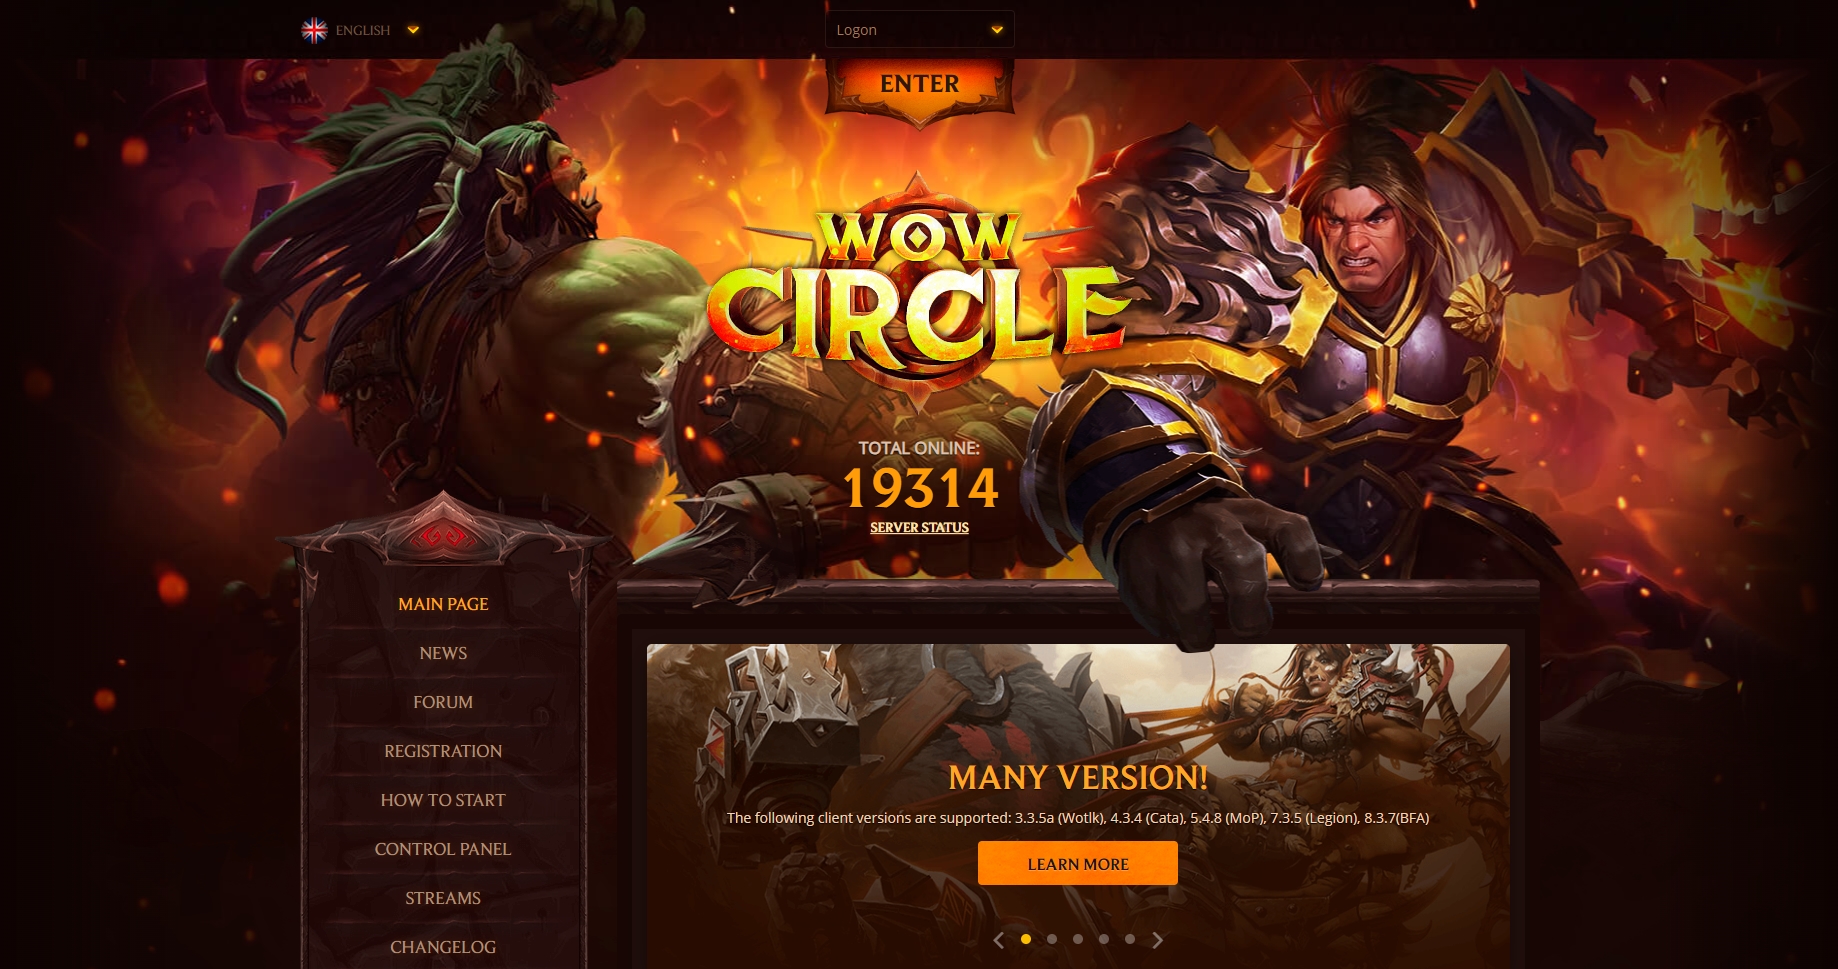 🔥 WowCircle - 15,000 + online players 🔥